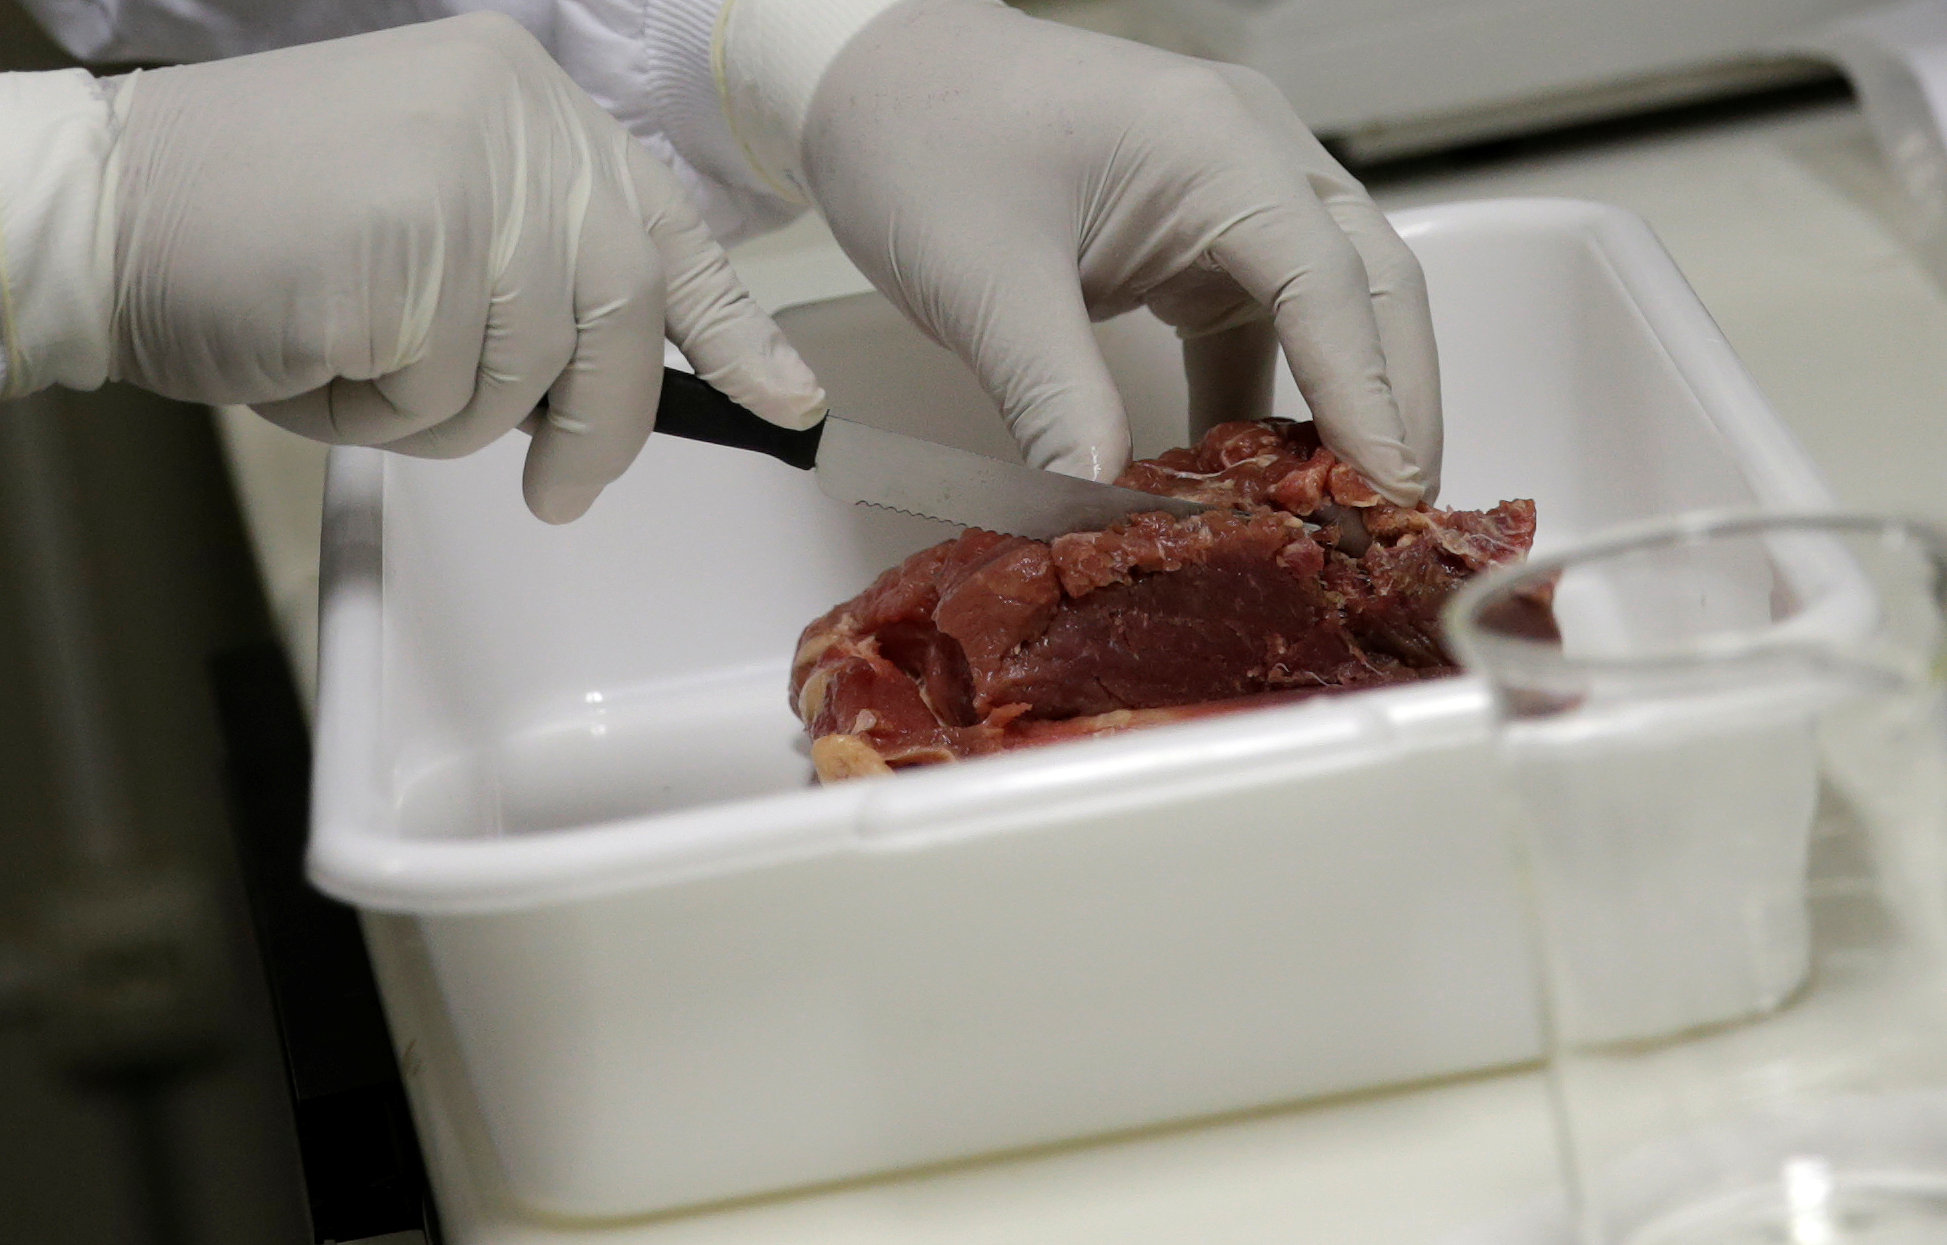 A veterinarian analyses a piece of meat from a Brazilian supermarket, at a veterinary laboratory with the public health department in Rio de Janeiro, Brazil, March 20, 2017. Photo: Ricardo Moraes/Reuters